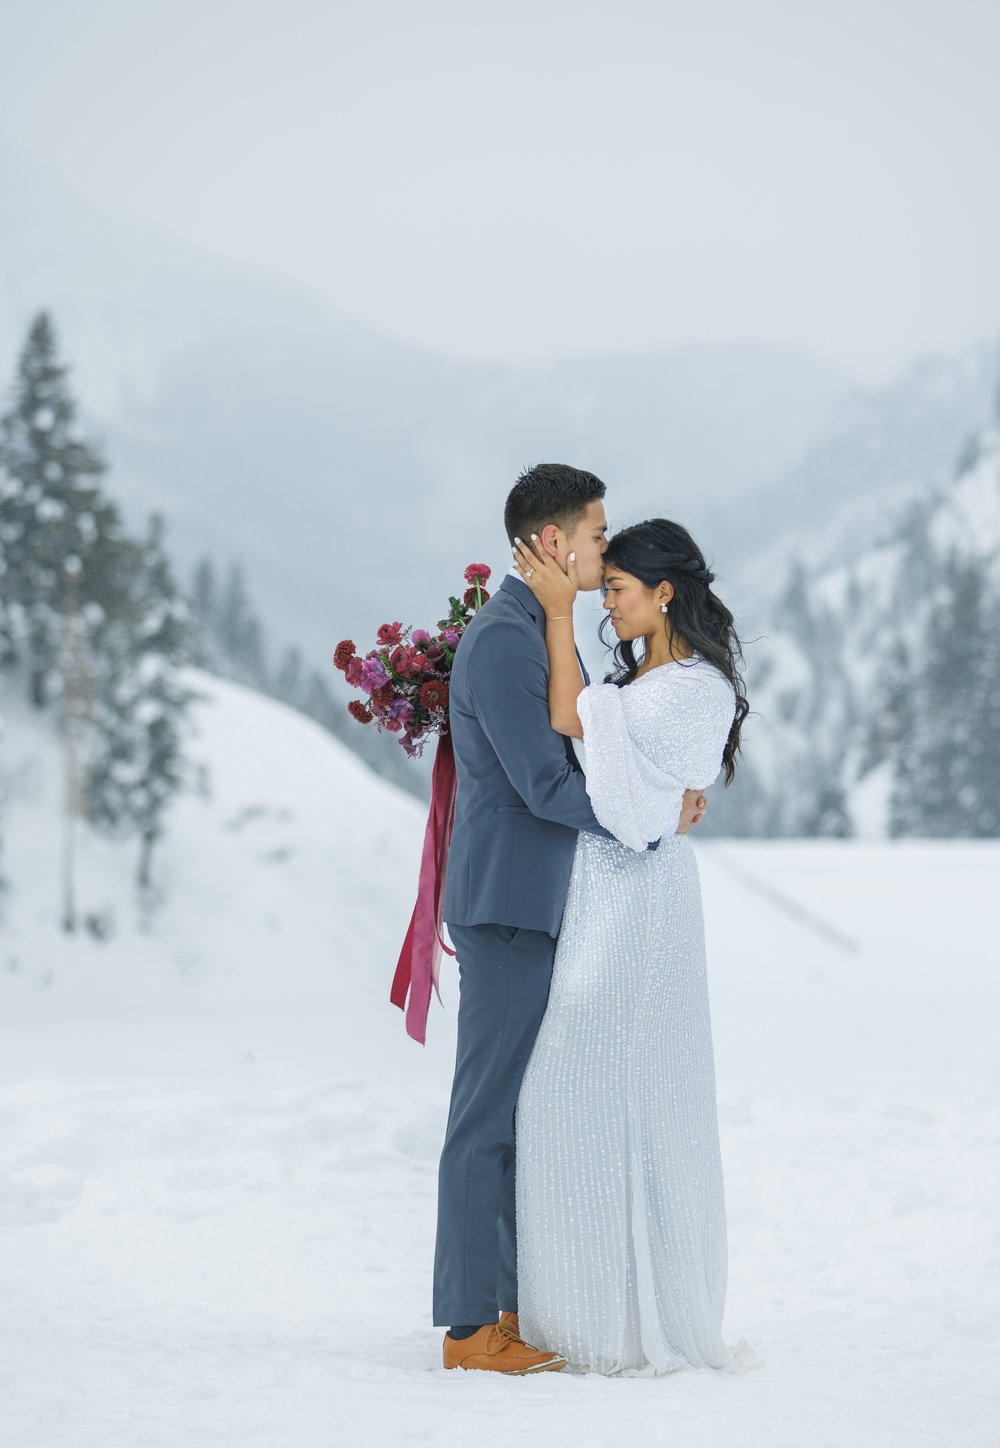  Groom kisses bride on the forehead in snowy mountains of Utah by Savanna Richardson Photography. fog #SavannaRichardsonPhotography #SavannaRichardsonBridals #WinterBridals #WinterWedding #TibbleForkBridals #UtahBridals #MountainBridals 